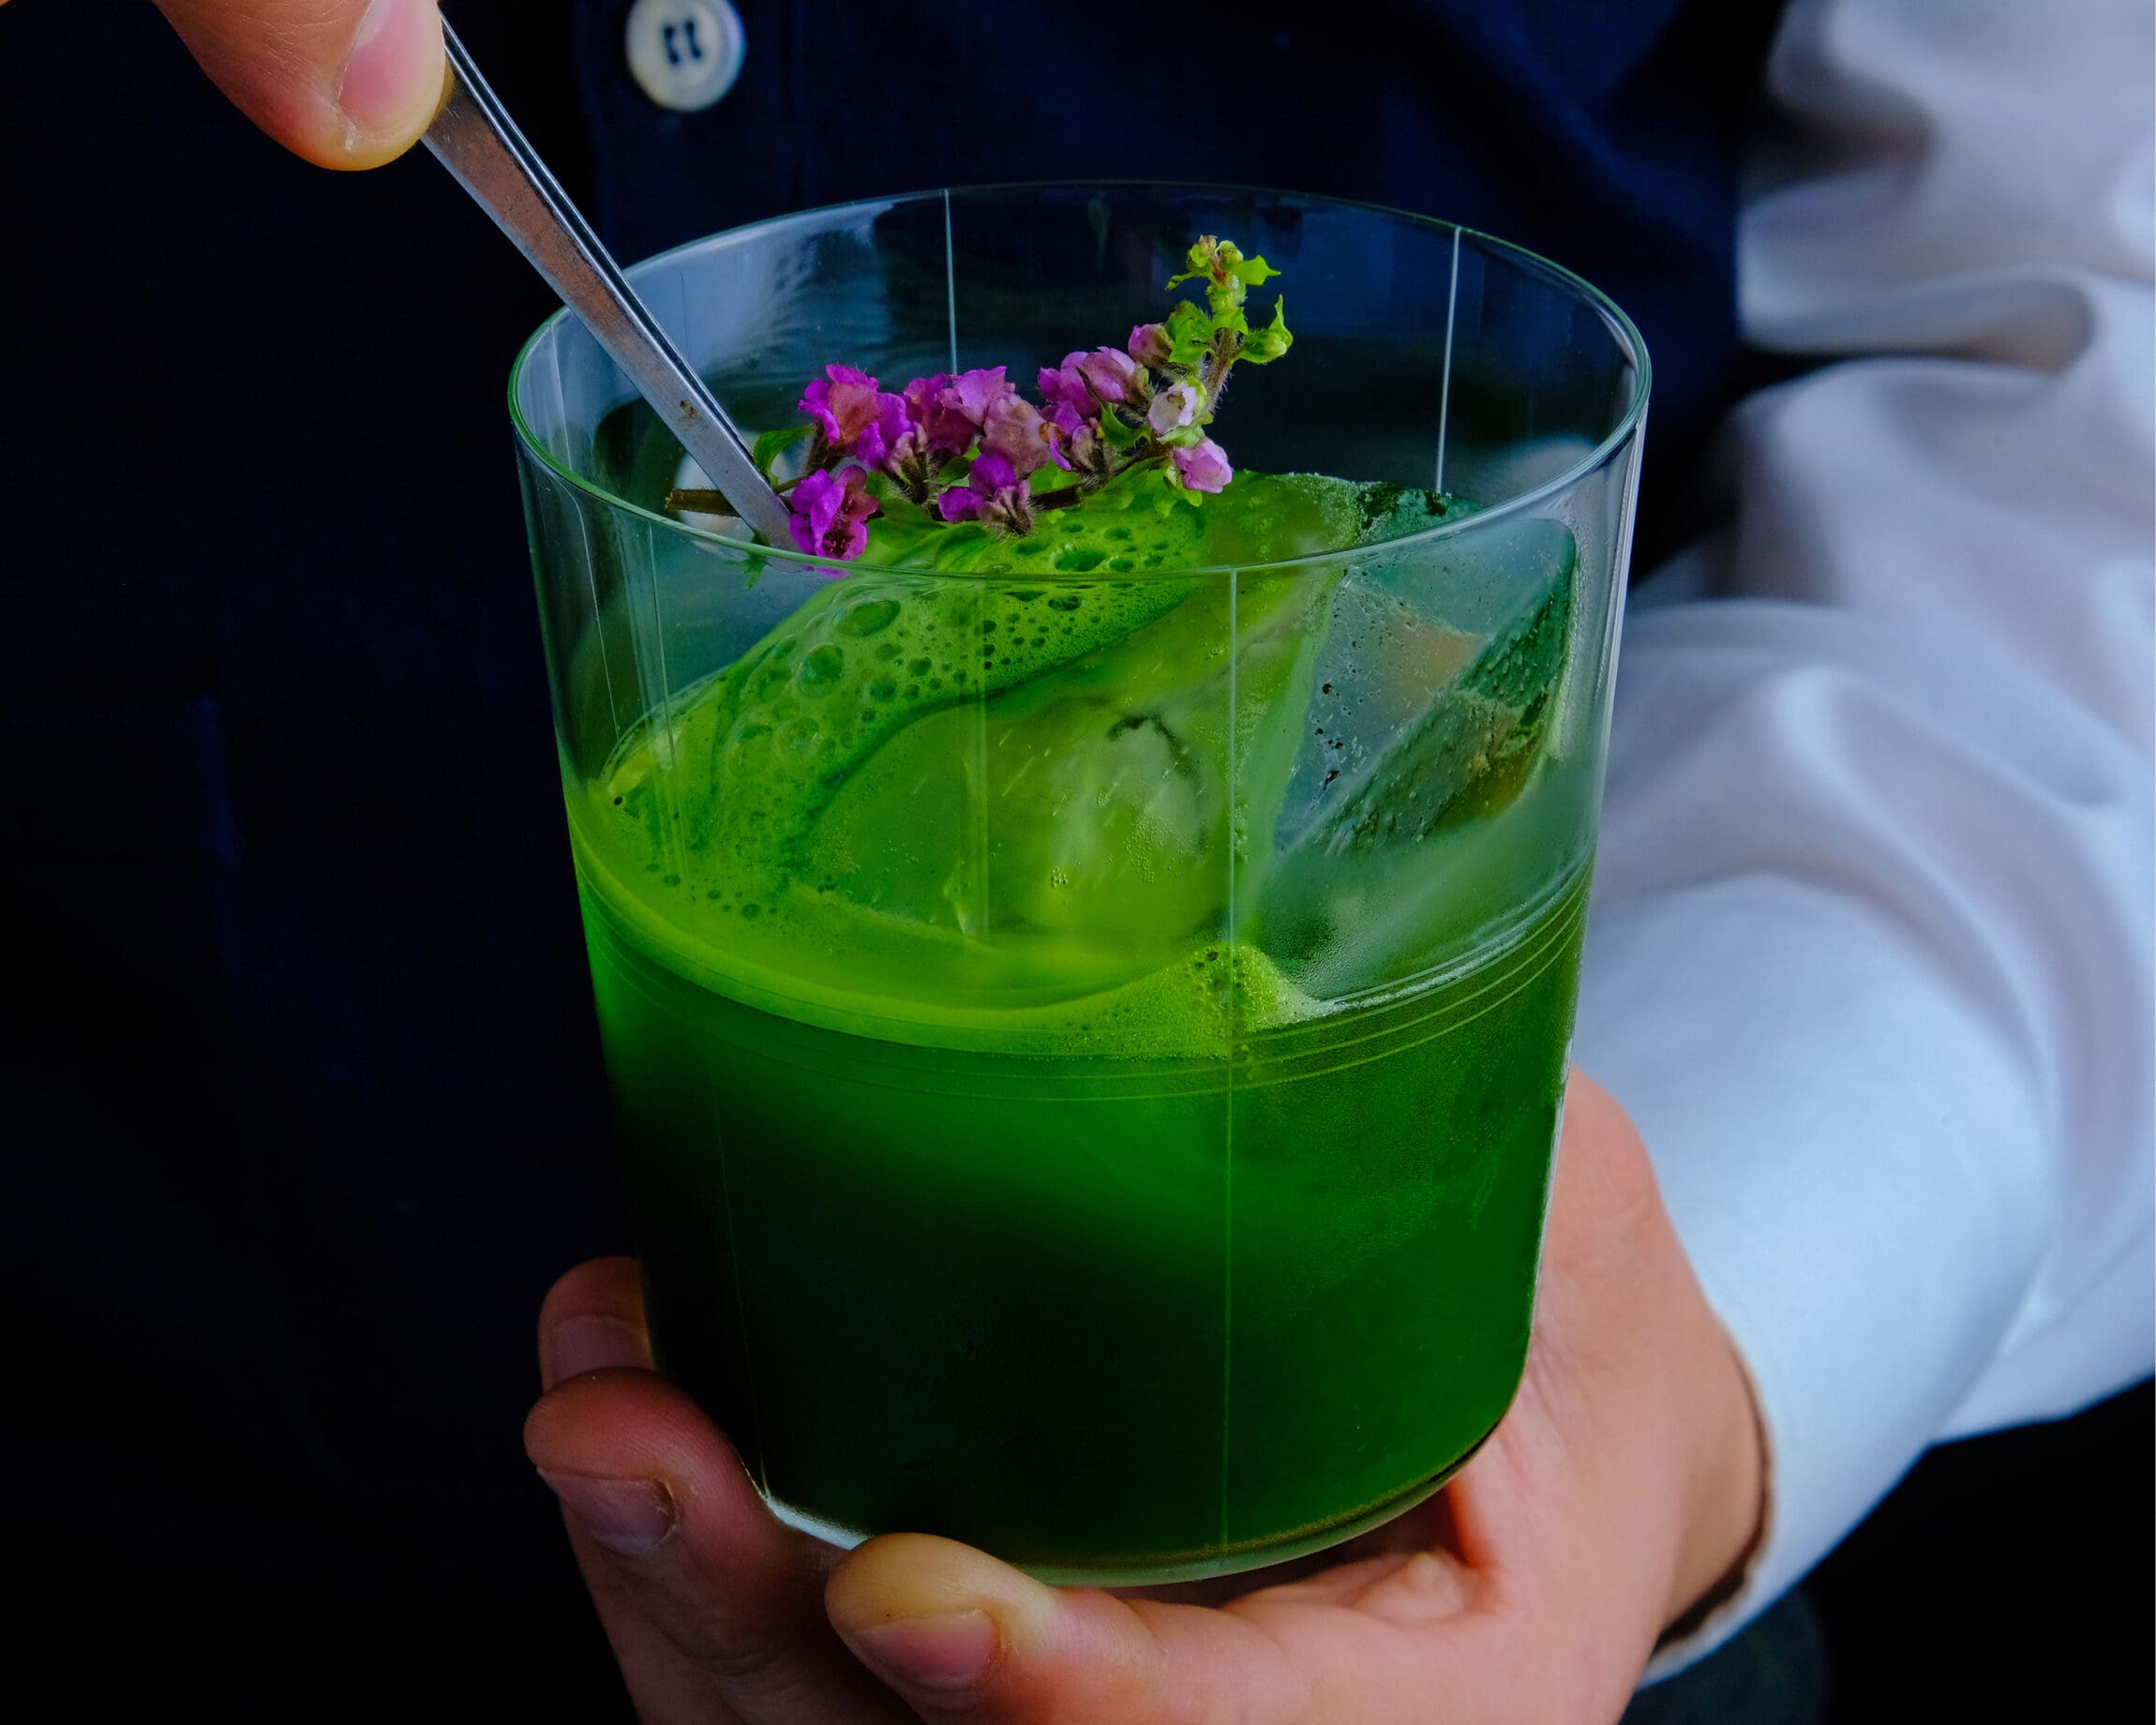 The best cocktail bars in New York City | A vibrant green cocktail garnished with a purple flower